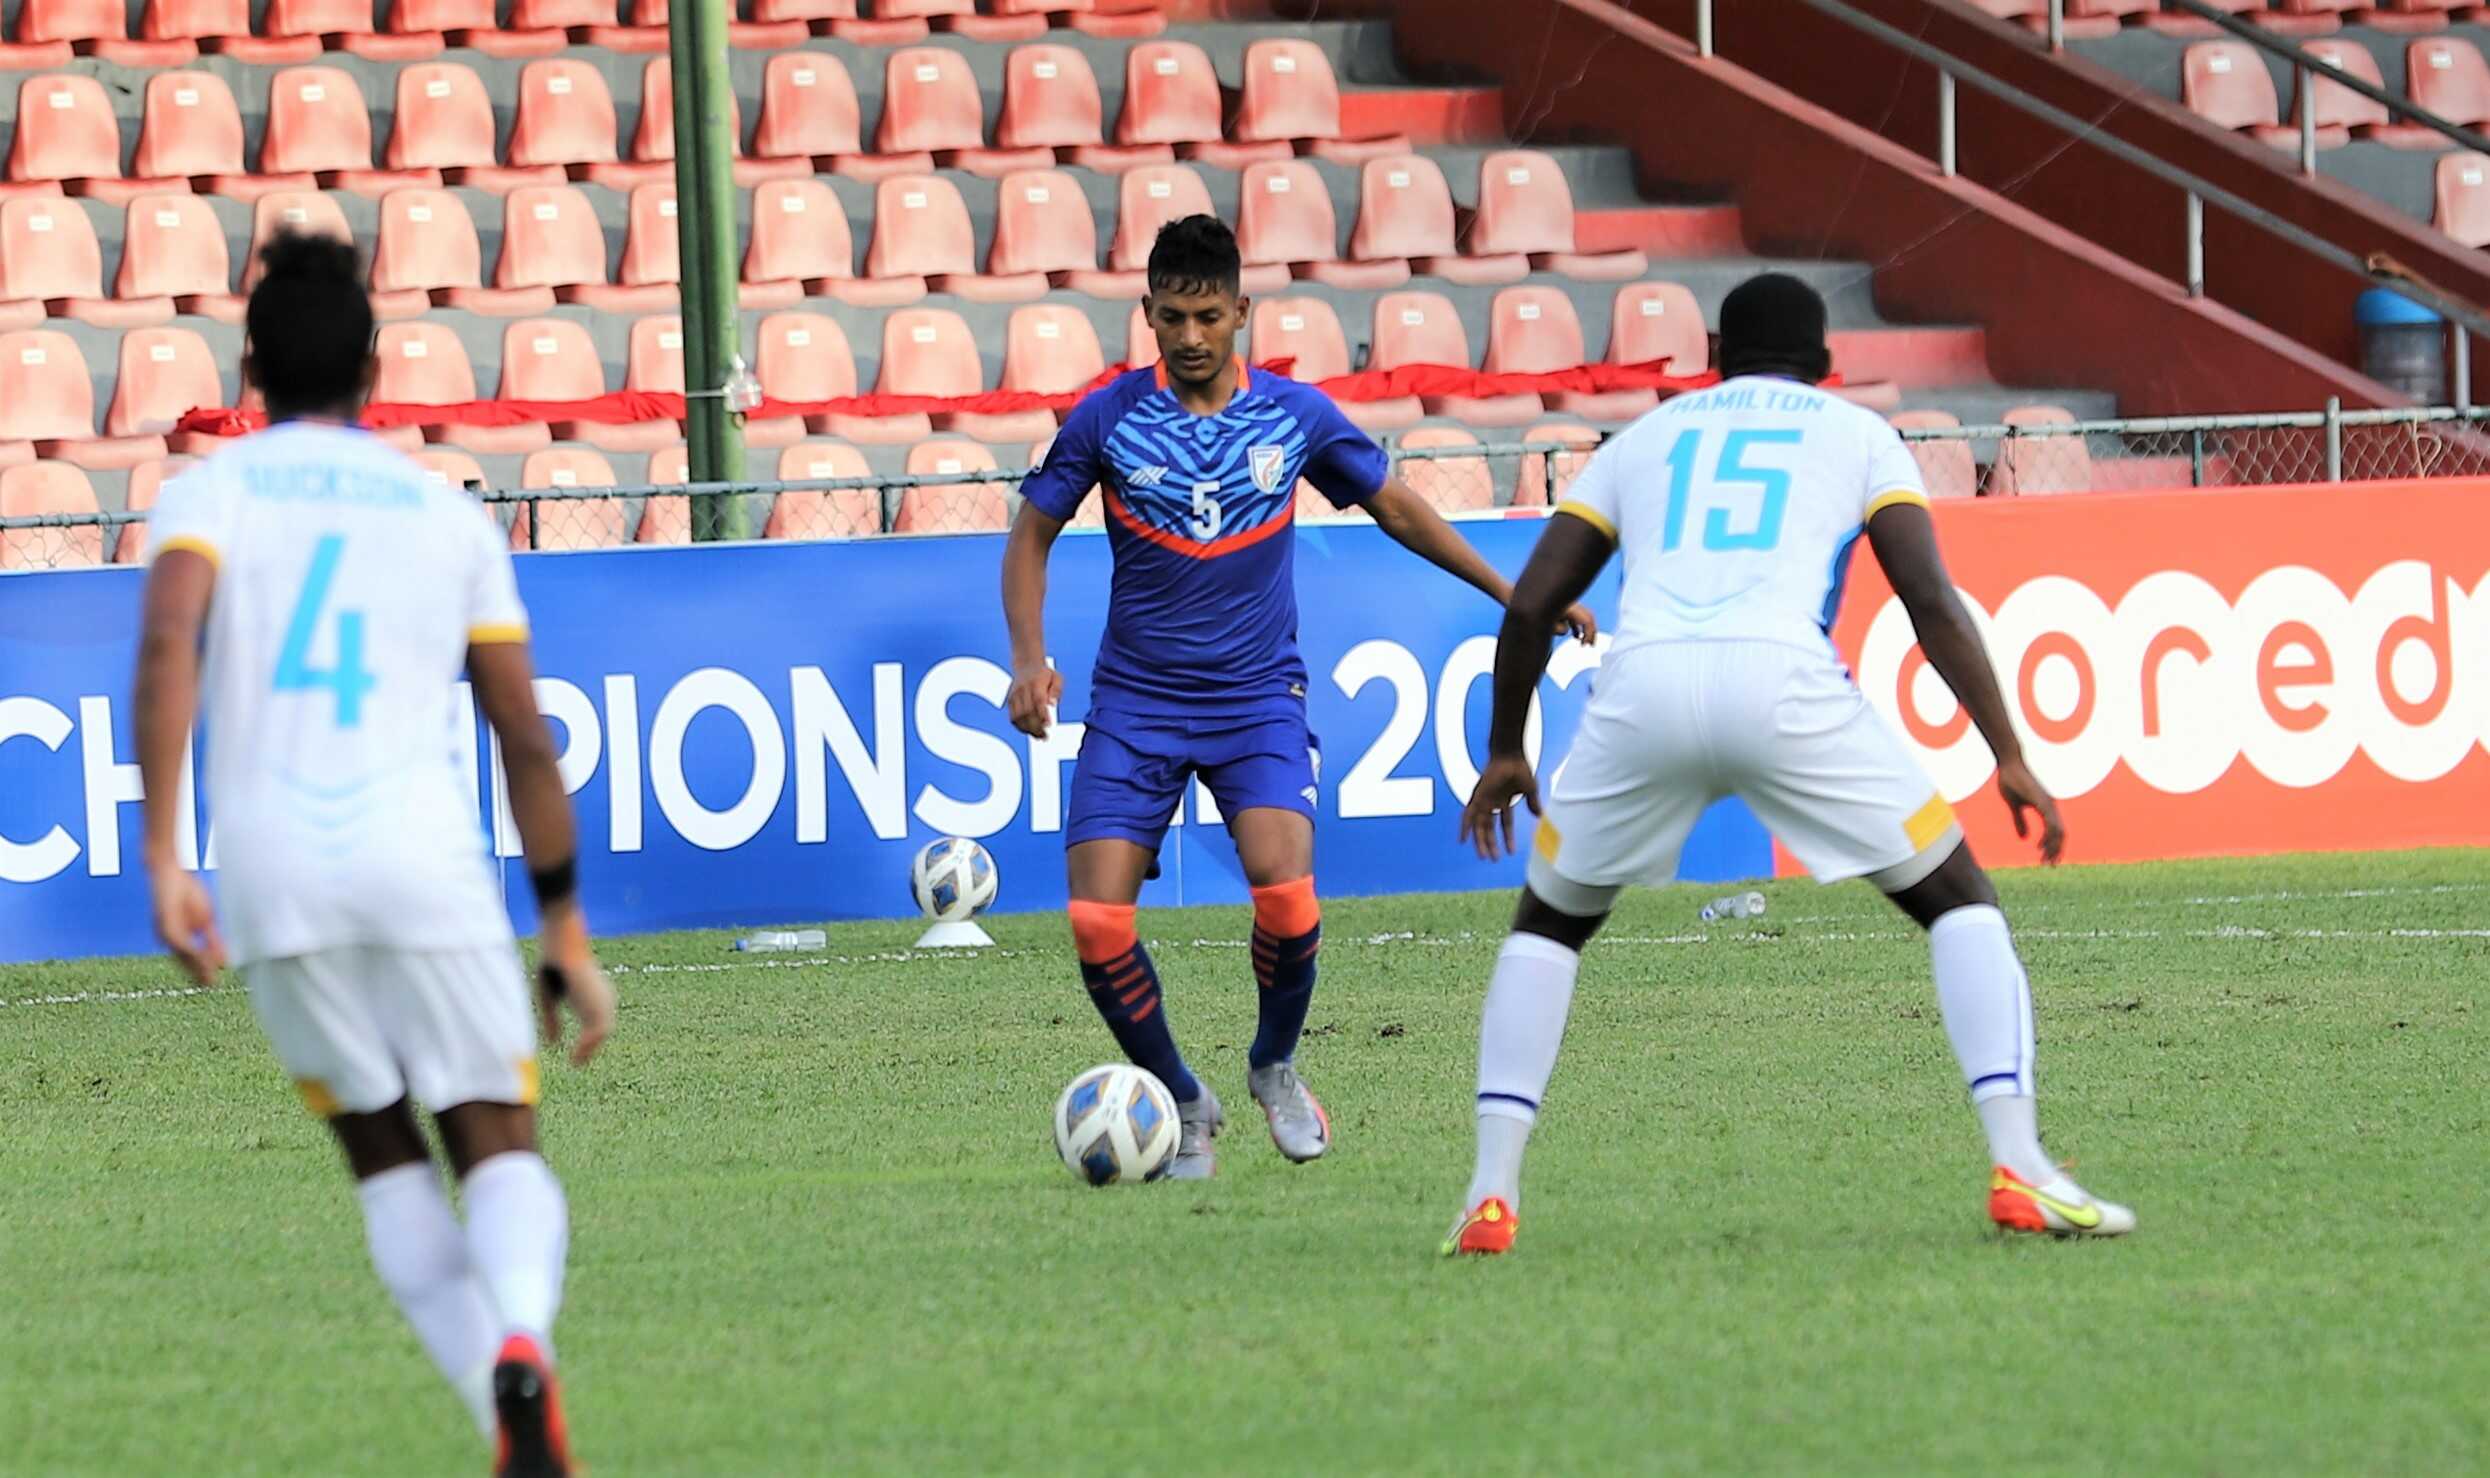 Indian Football Players Ended in a 0-0 Stalemate with Sri Lanka